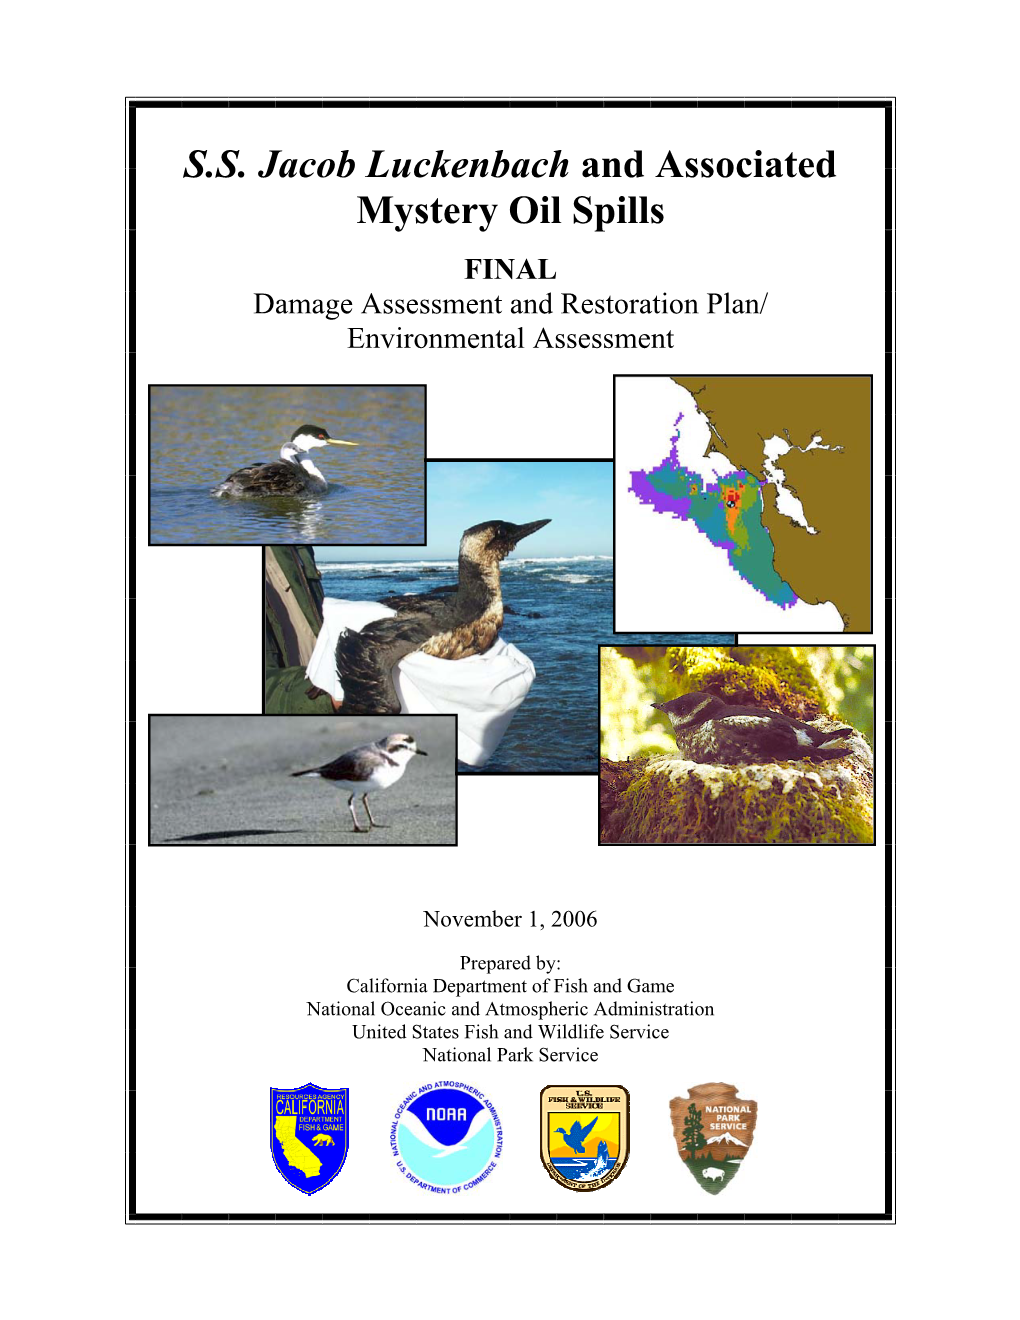 S.S. Jacob Luckenbach and Associated Mystery Oil Spills